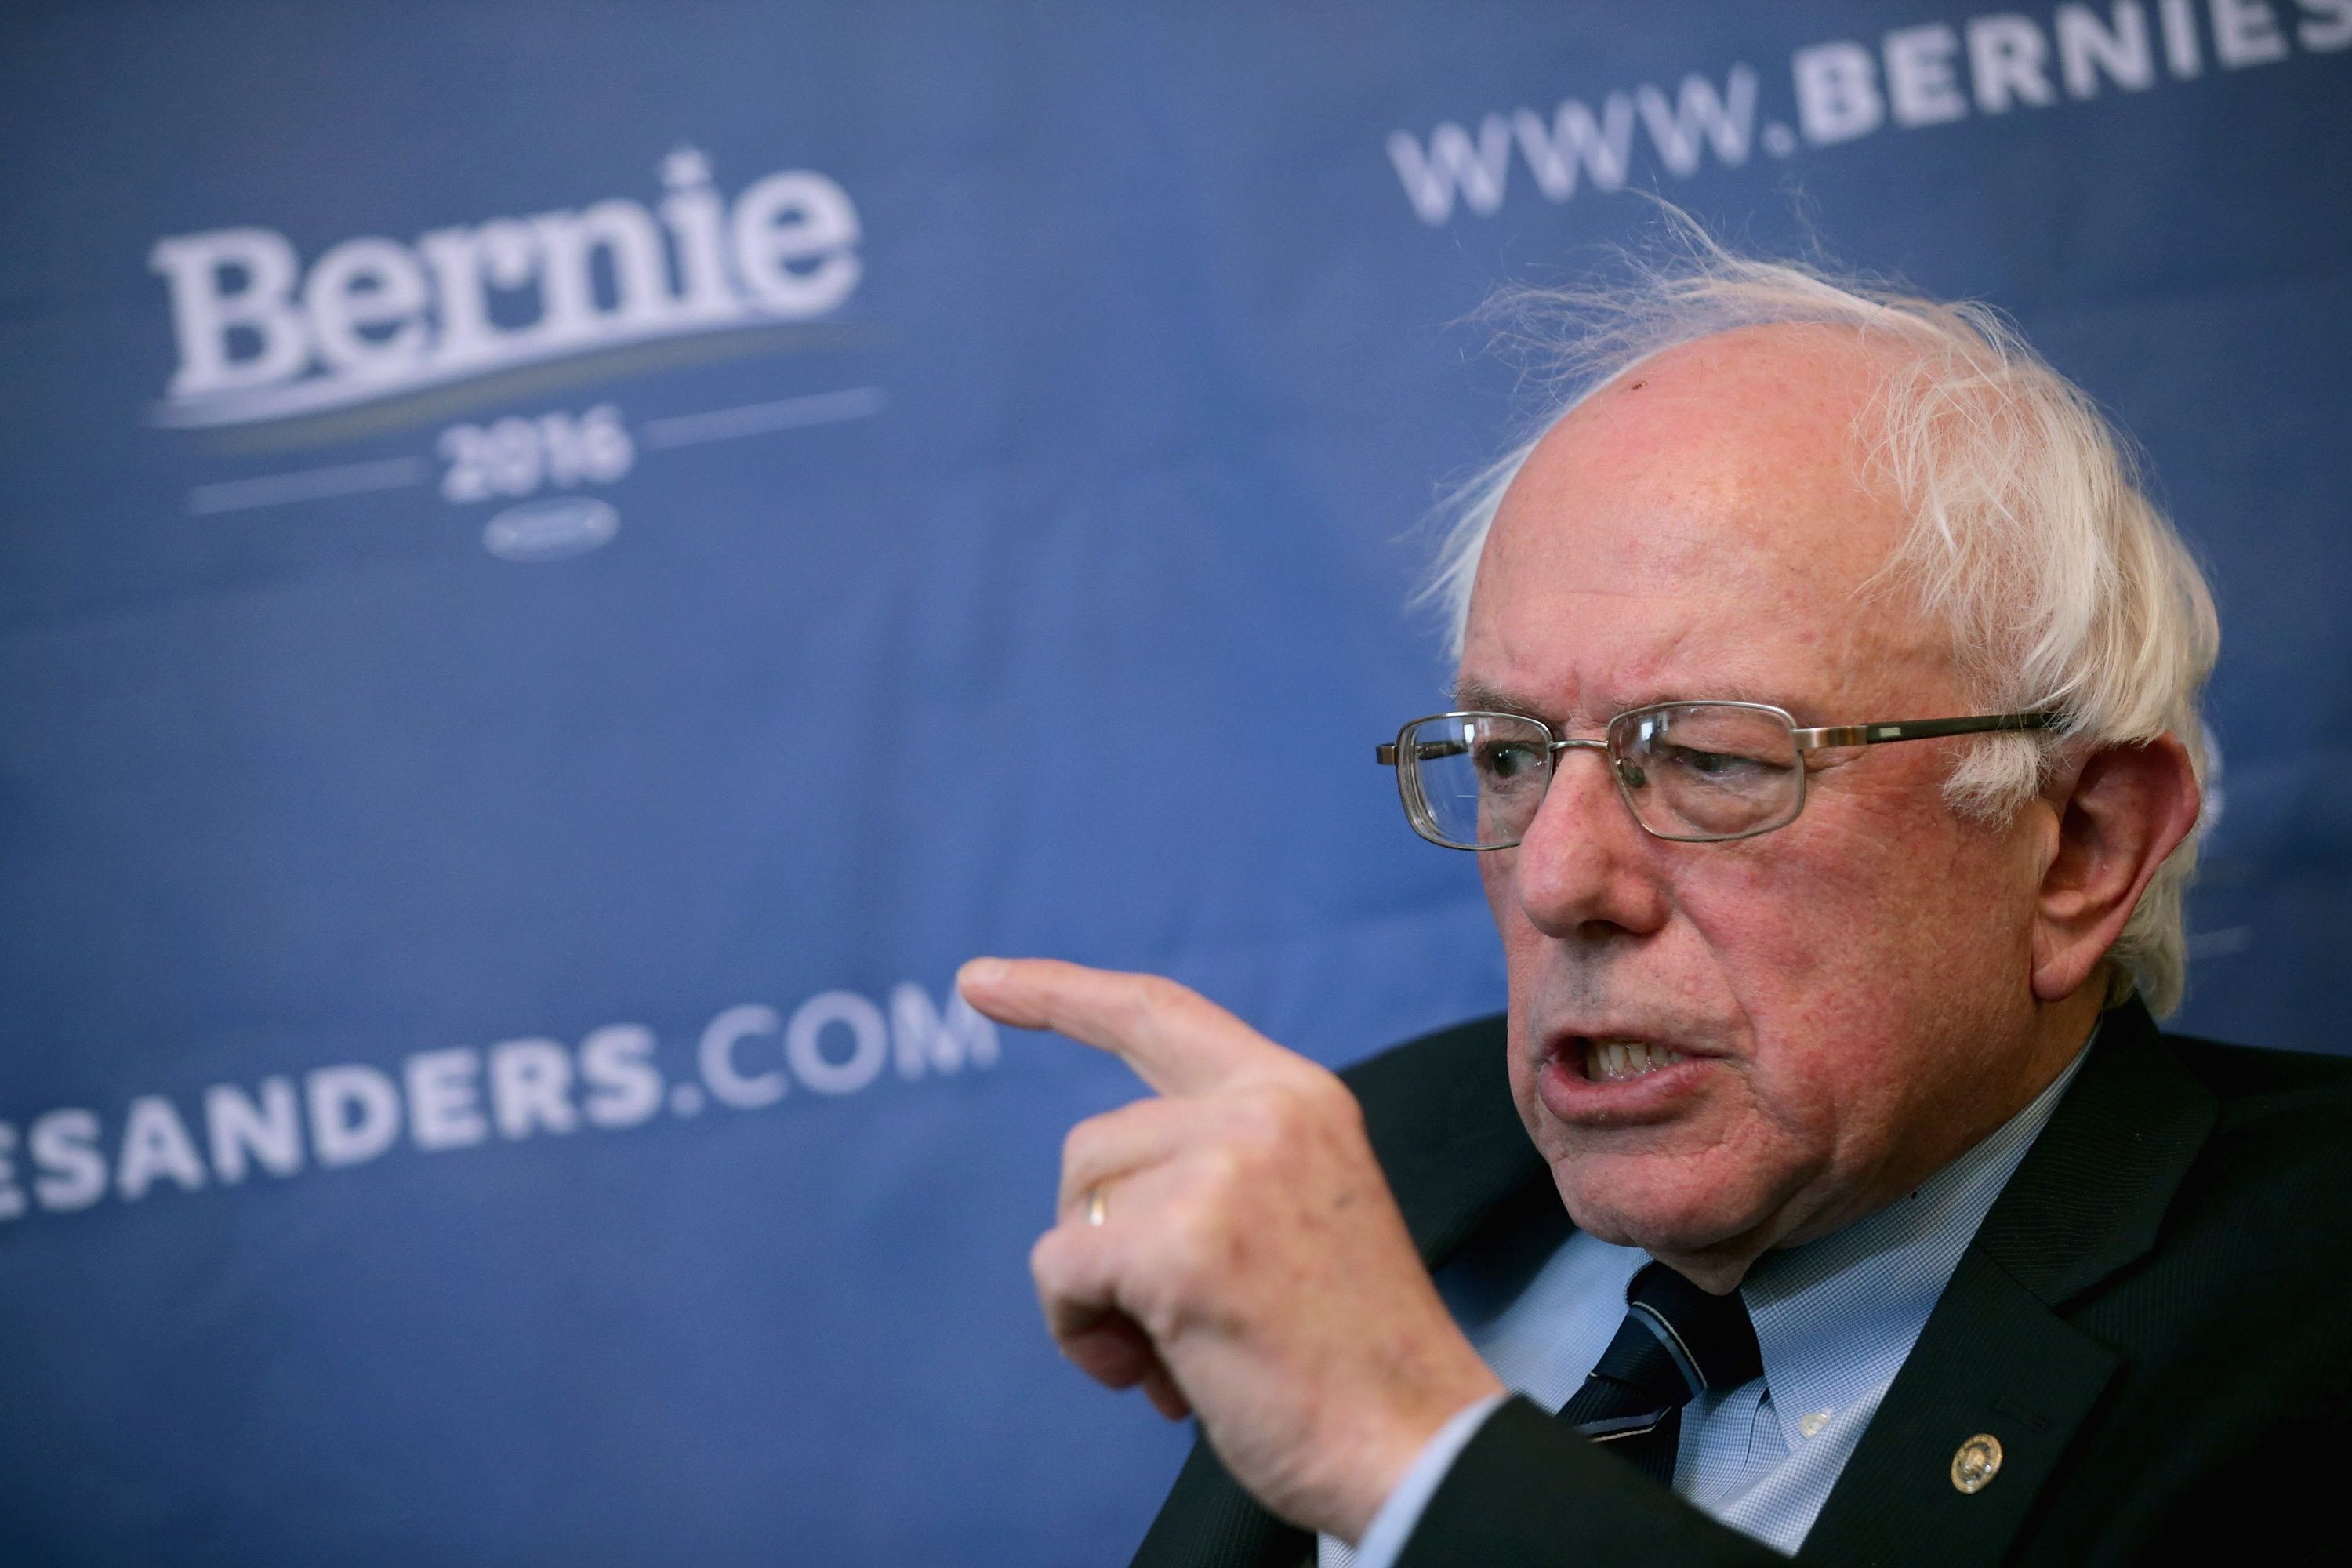 Democratic presidential candidate Sen. Bernie Sanders (I-VT) participates in an internet live stream discussion about putting families first in developing immigration policy at his campaign office December 7, 2015 in Washington, DC. (Chip Somodevilla&mdash;Getty Images)